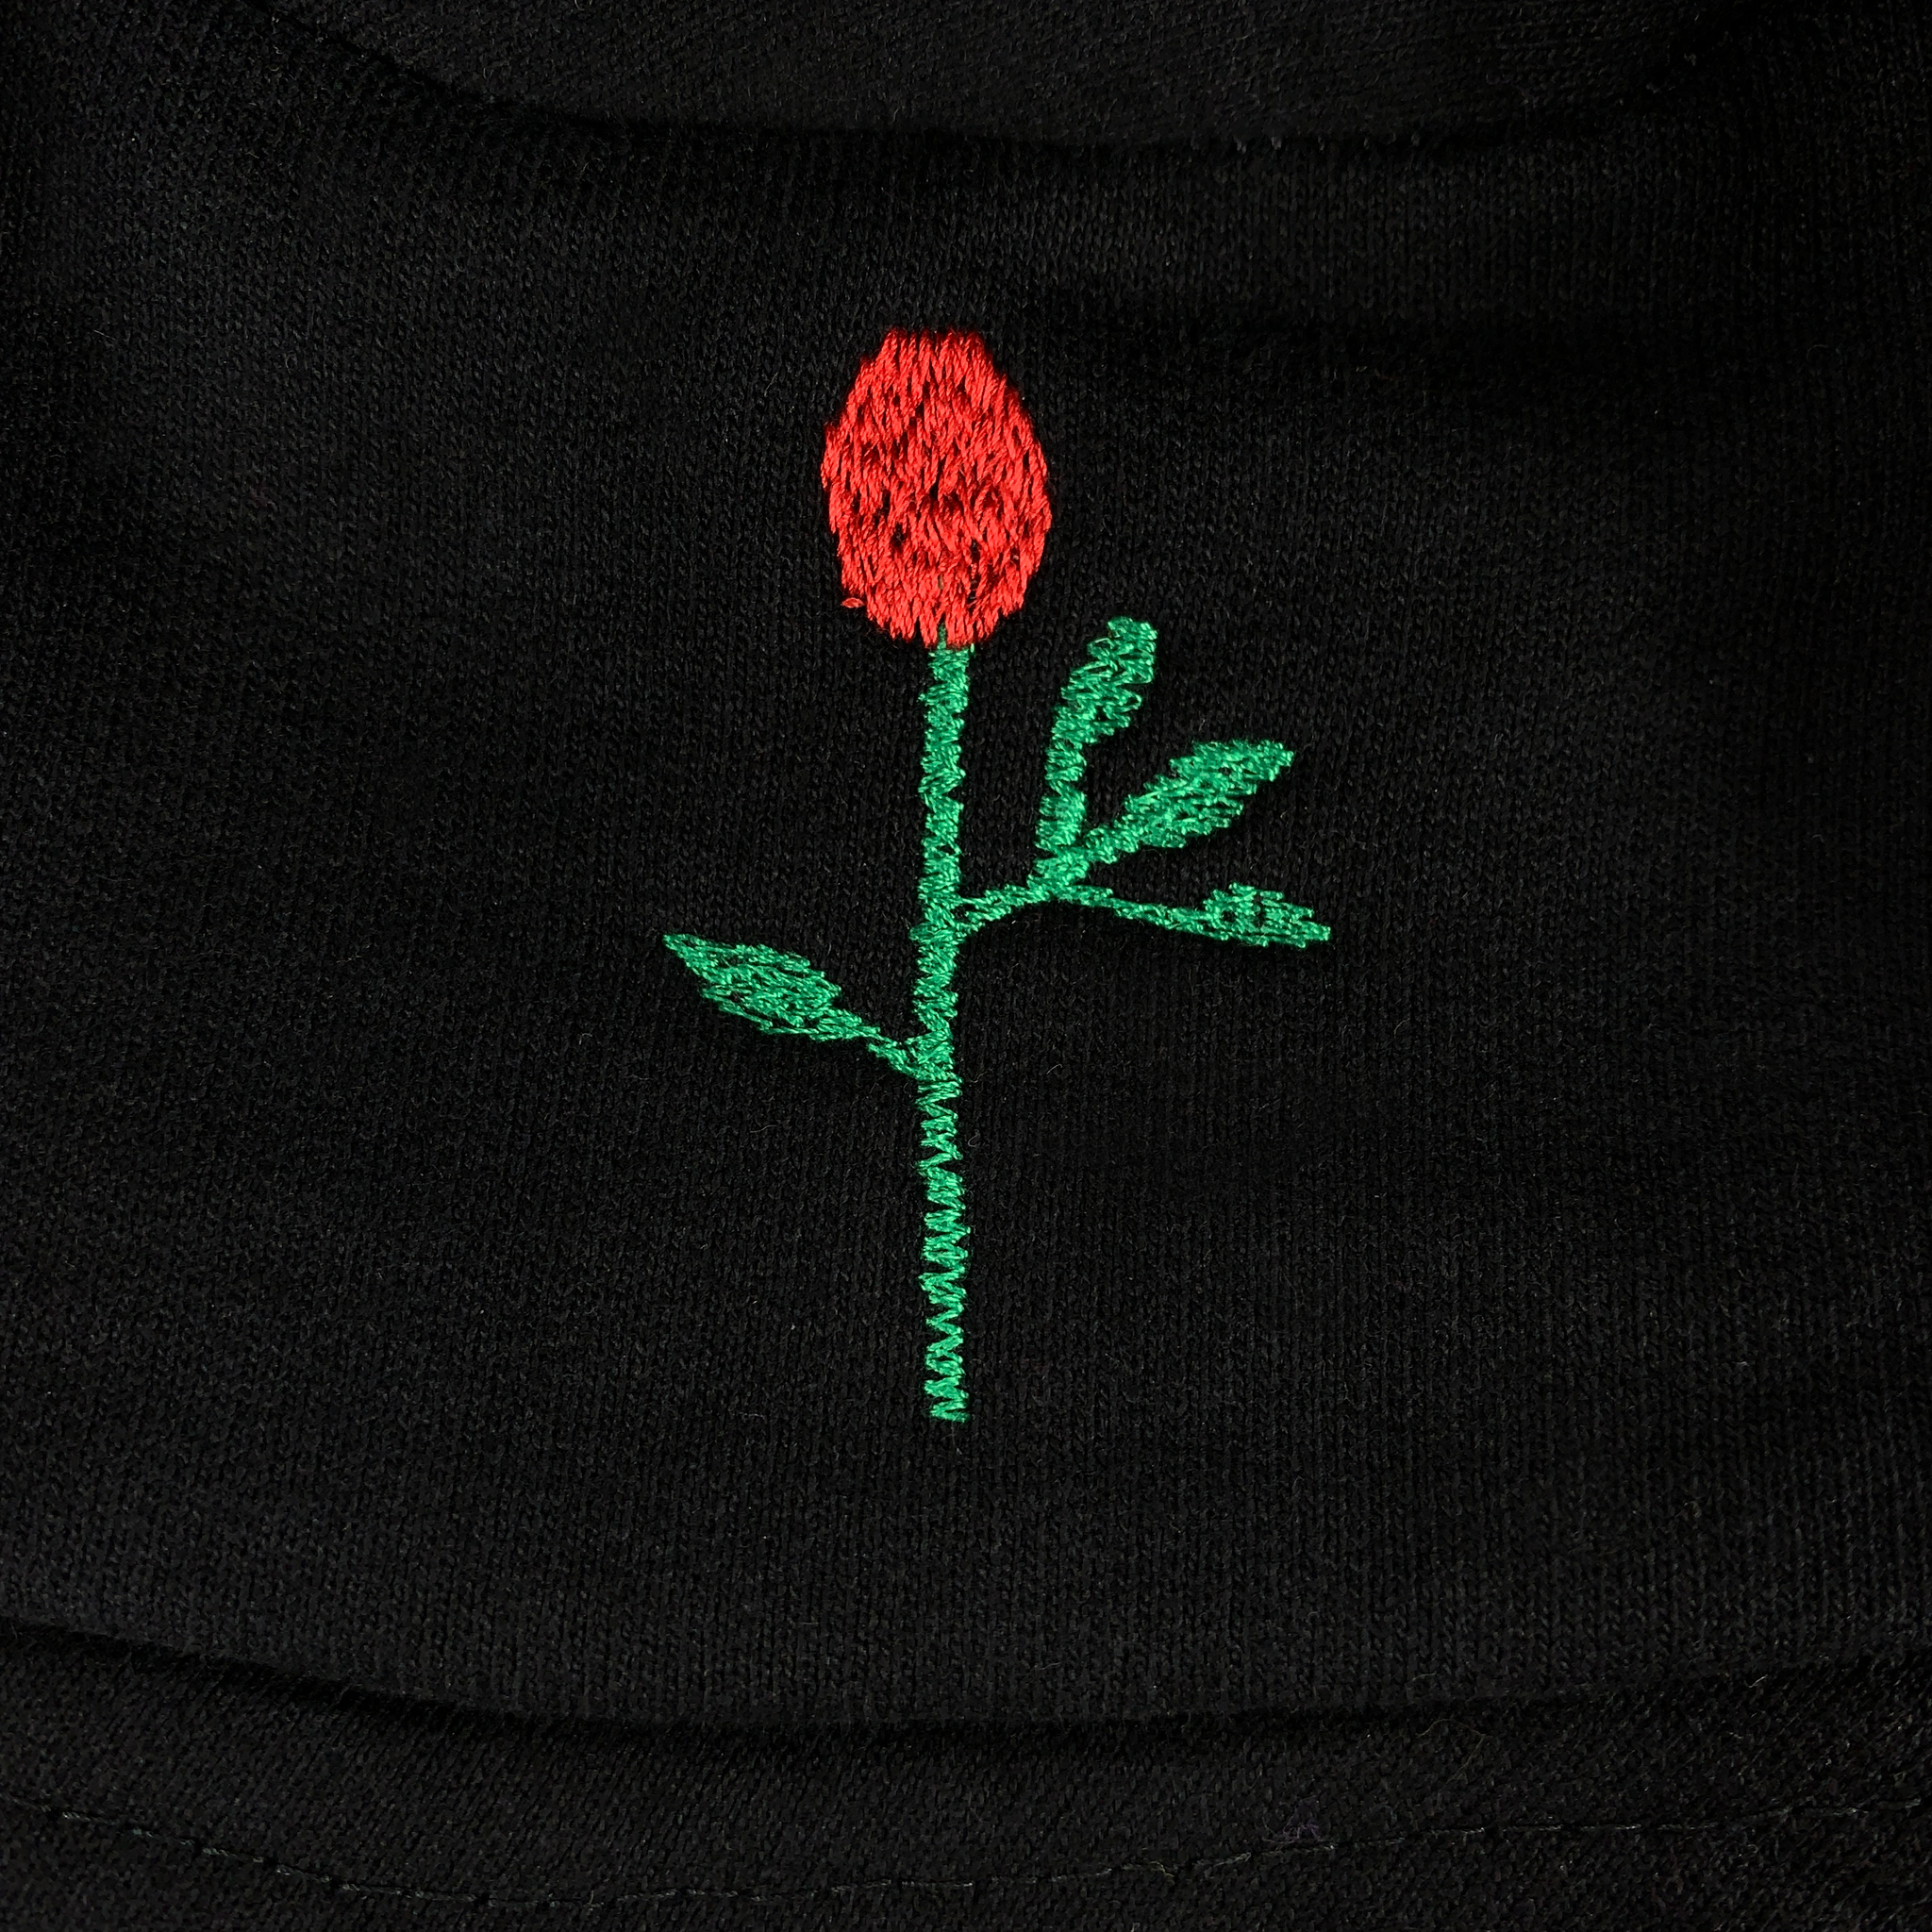 Home sewn knit bucket hat - organic cotton - dyed and embroidered - M/22.5